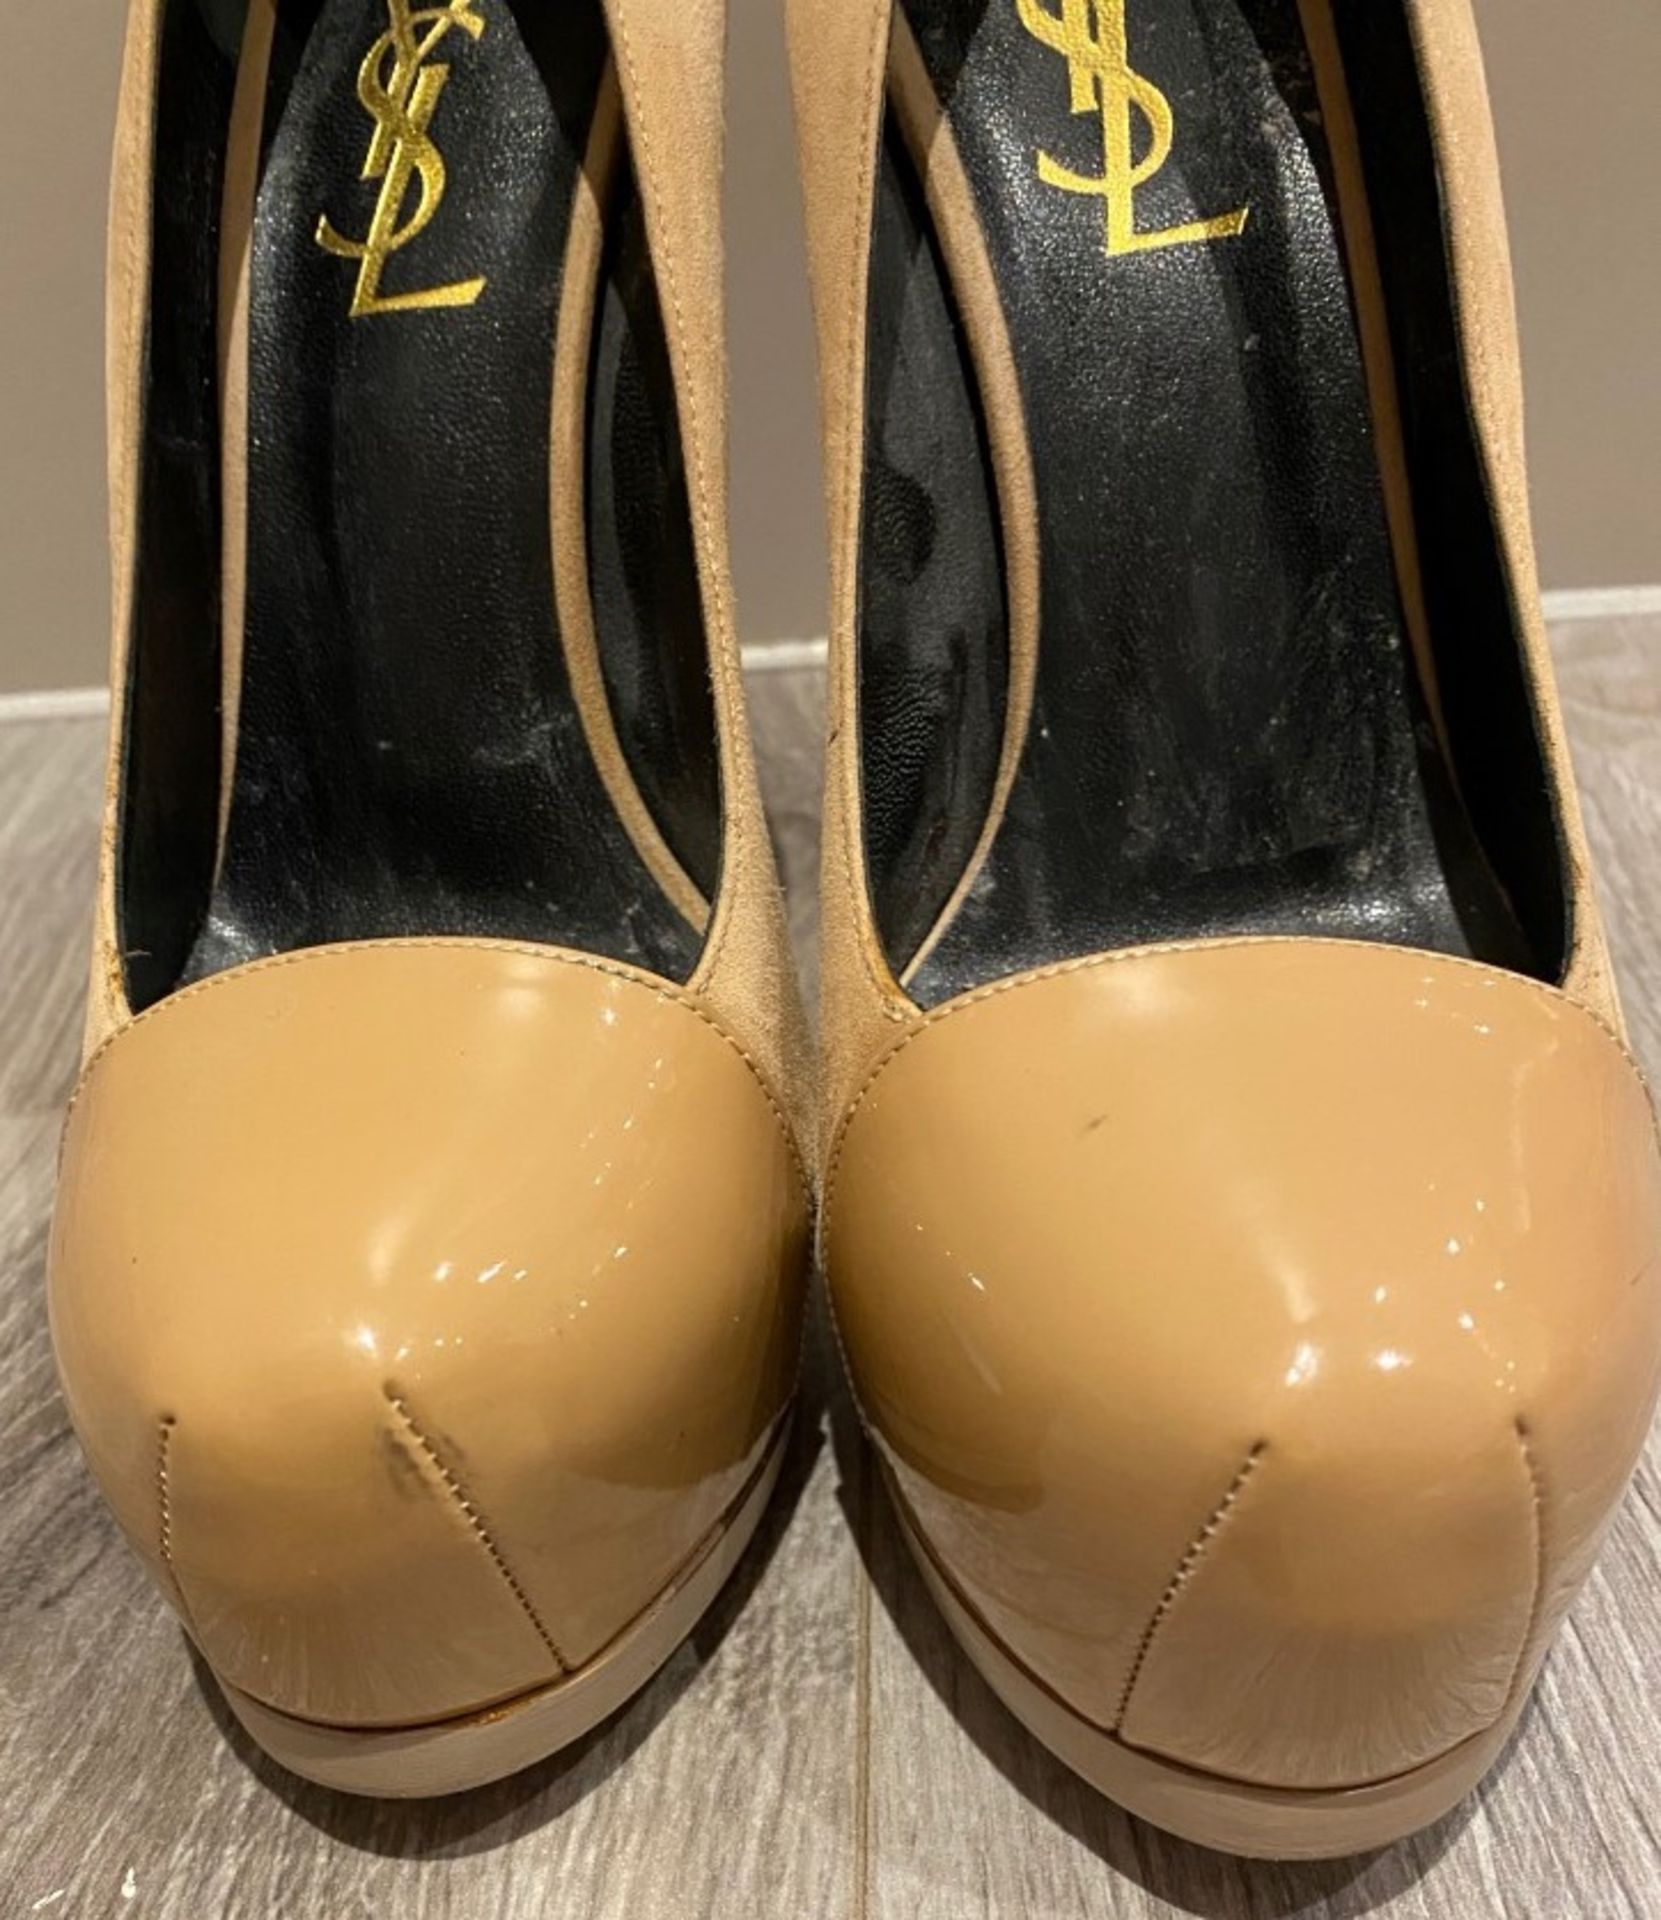 1 x Pair Of Genuine YSL High Heel Shoes In Light Beige - Size: 36 - Preowned in Very Good Condition - Image 4 of 4